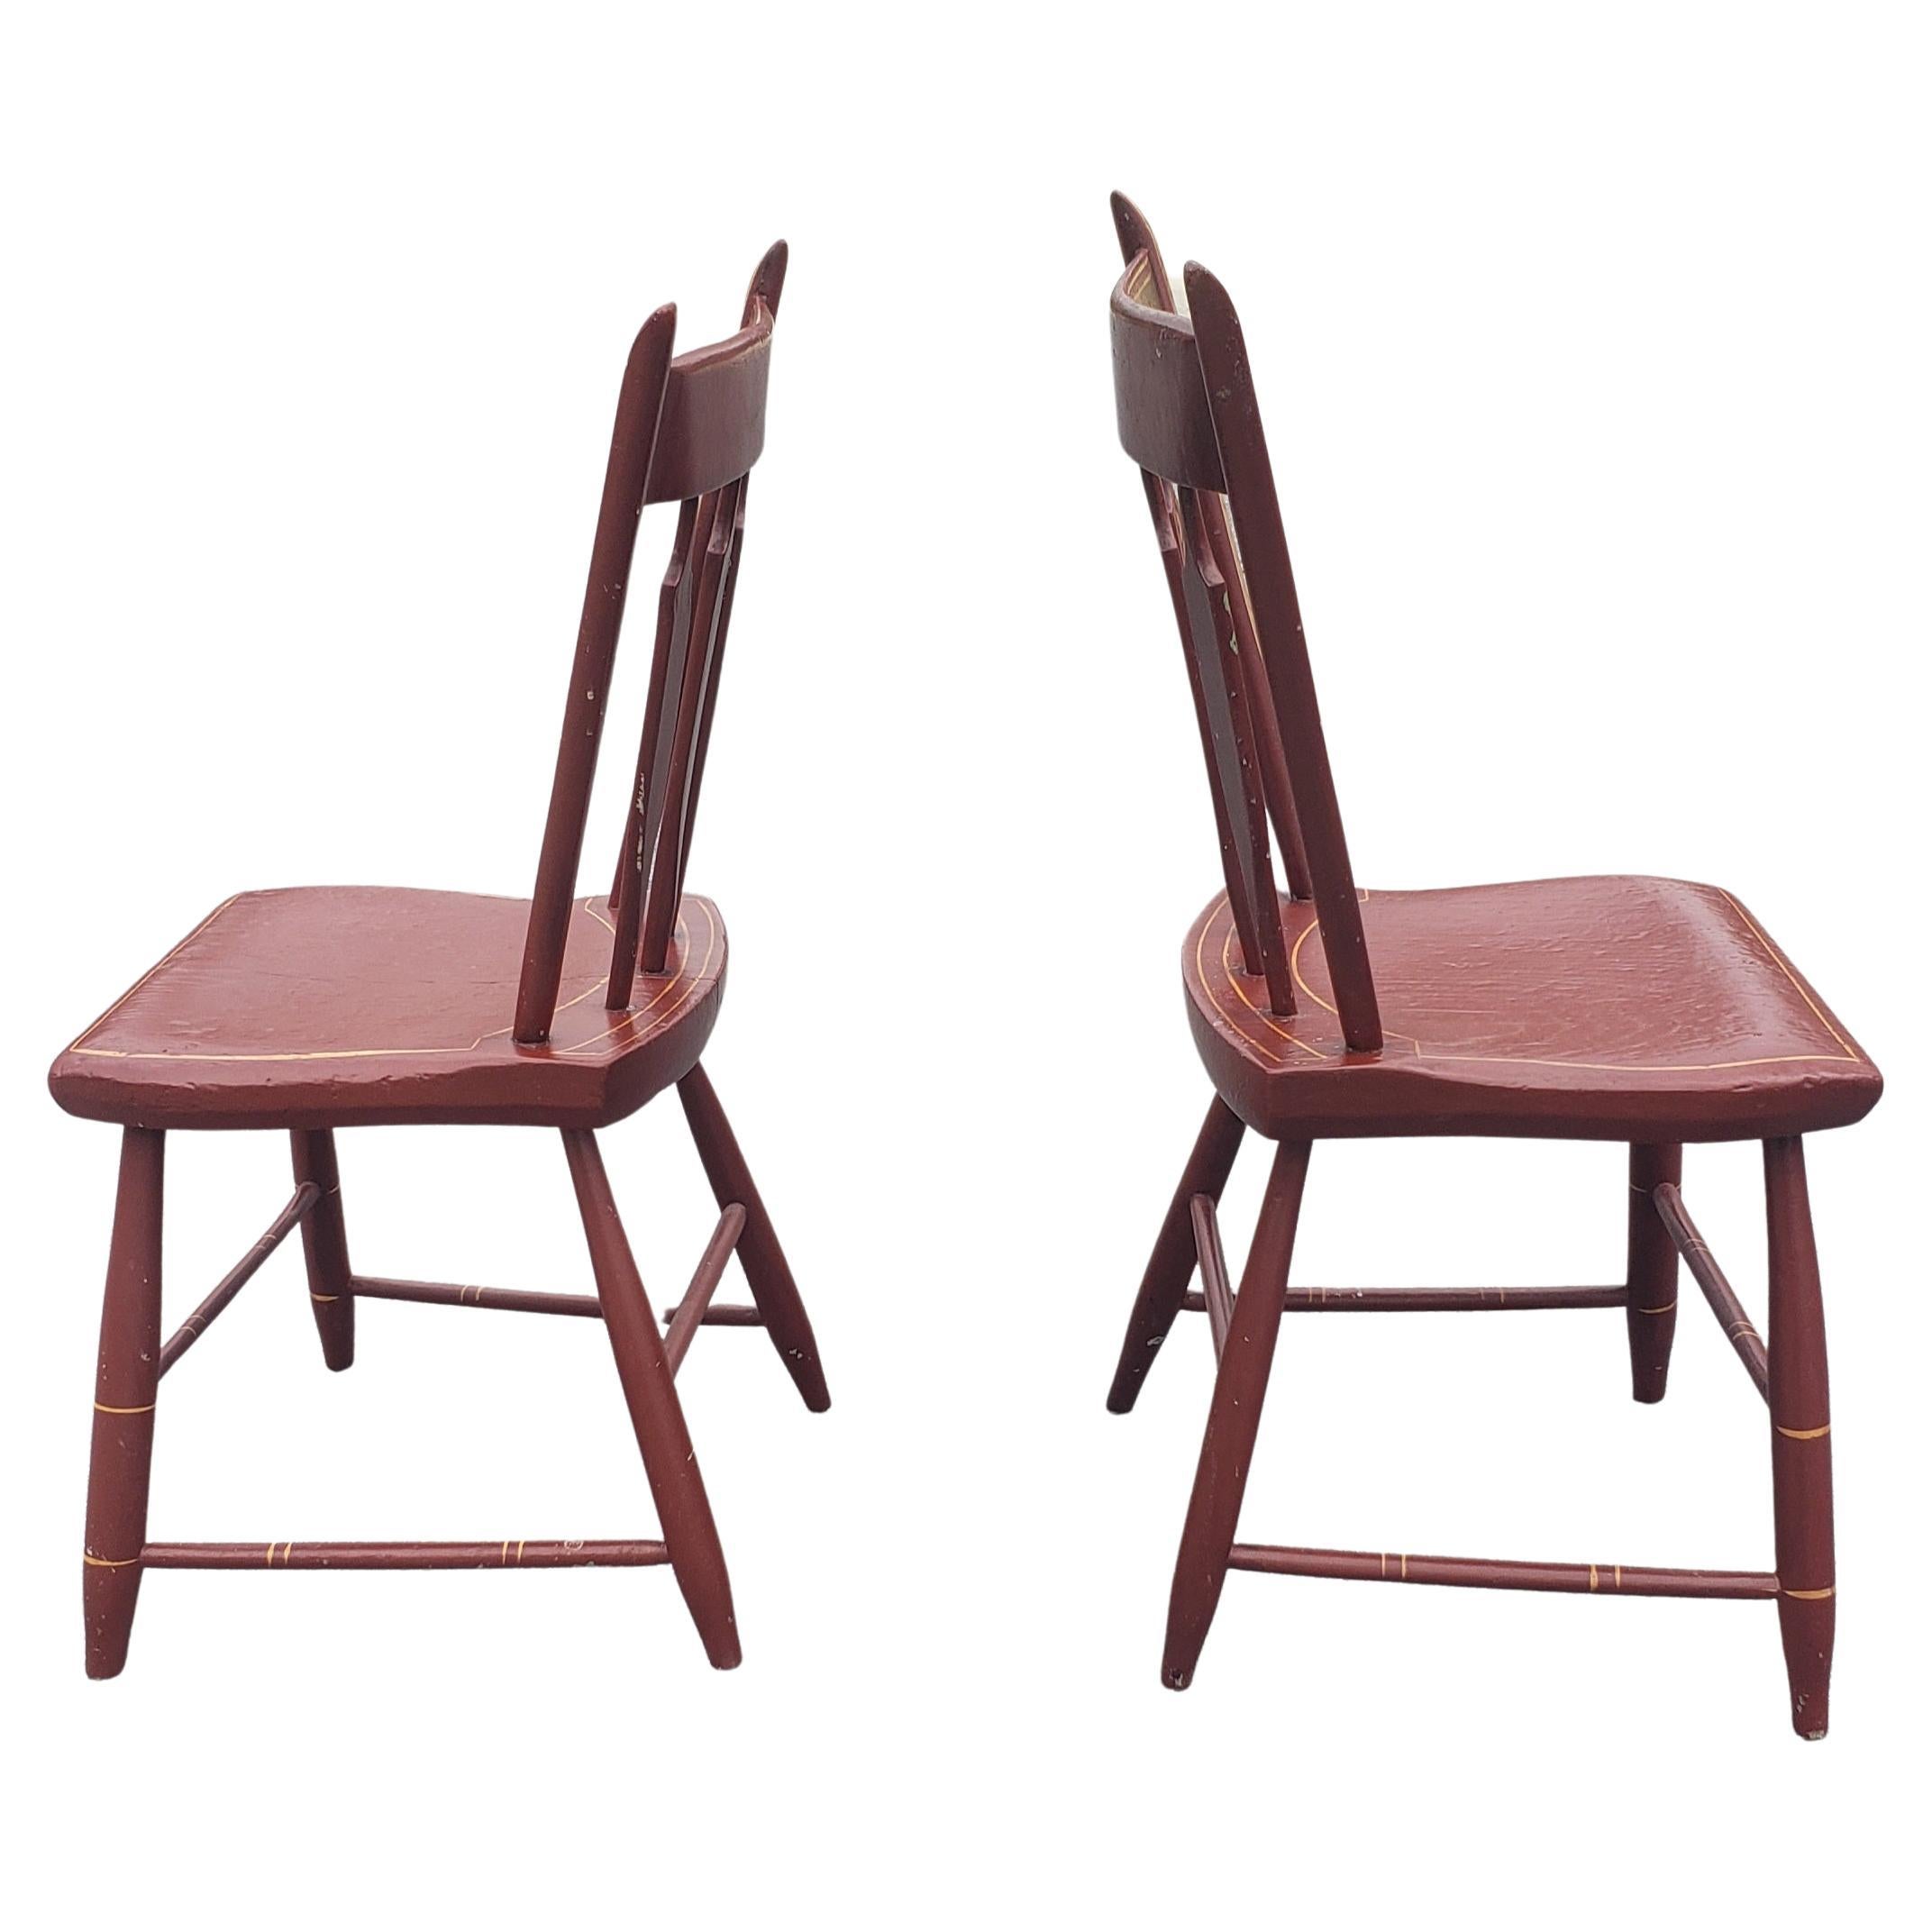 Pair of 19th Century. Signed Hand Painted and Decorated Plank Seat Side Chairs For Sale 1